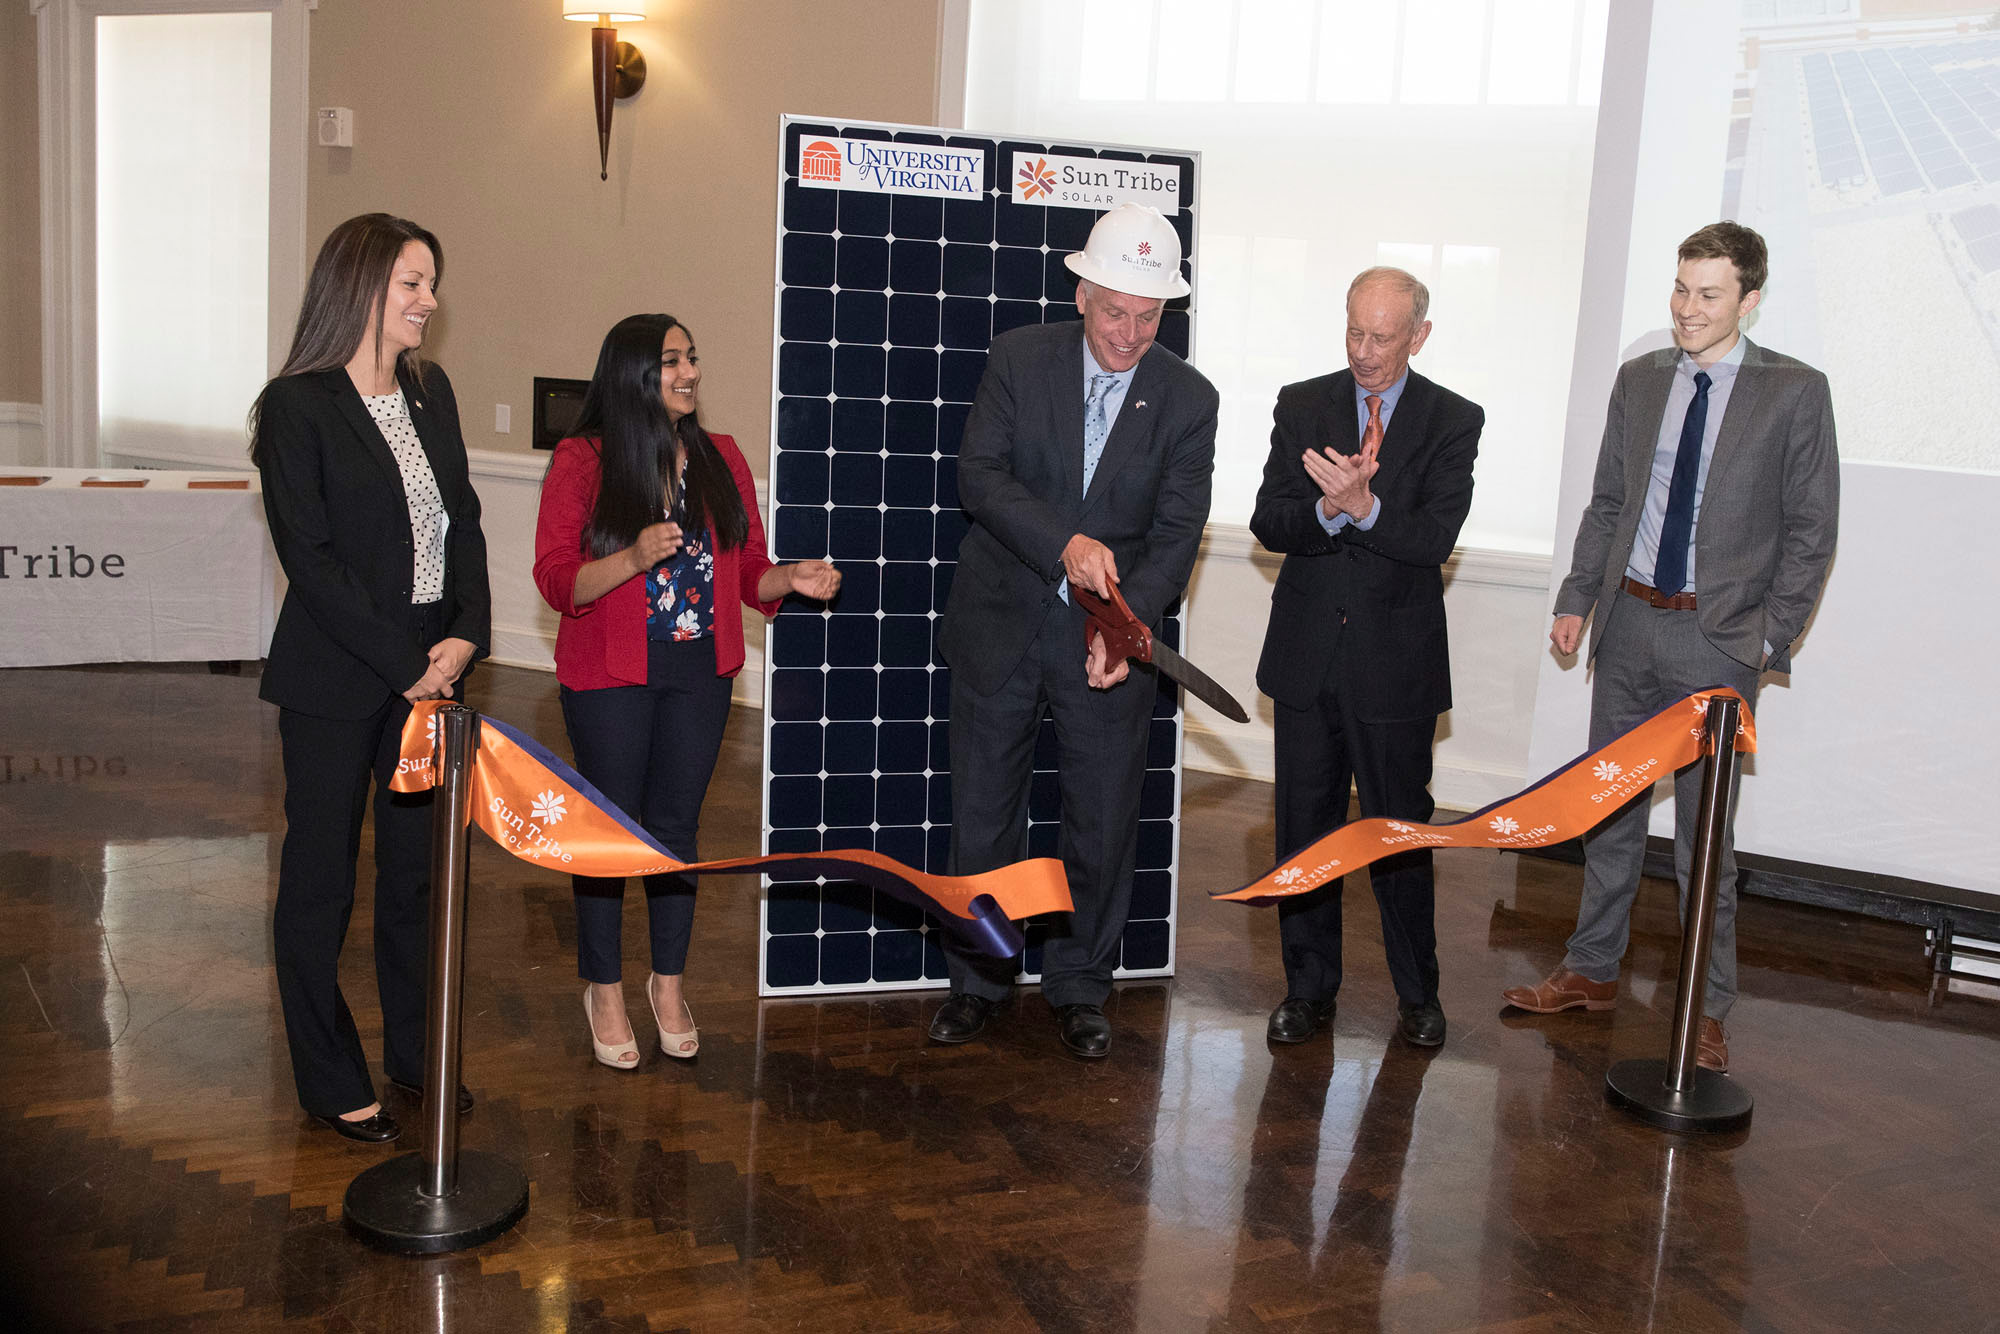 McAuliffe cut a symbolic ribbon for the array, which has been in place since February and is on its way toward producing nearly 200,000 kilowatt hours of electricity this year.